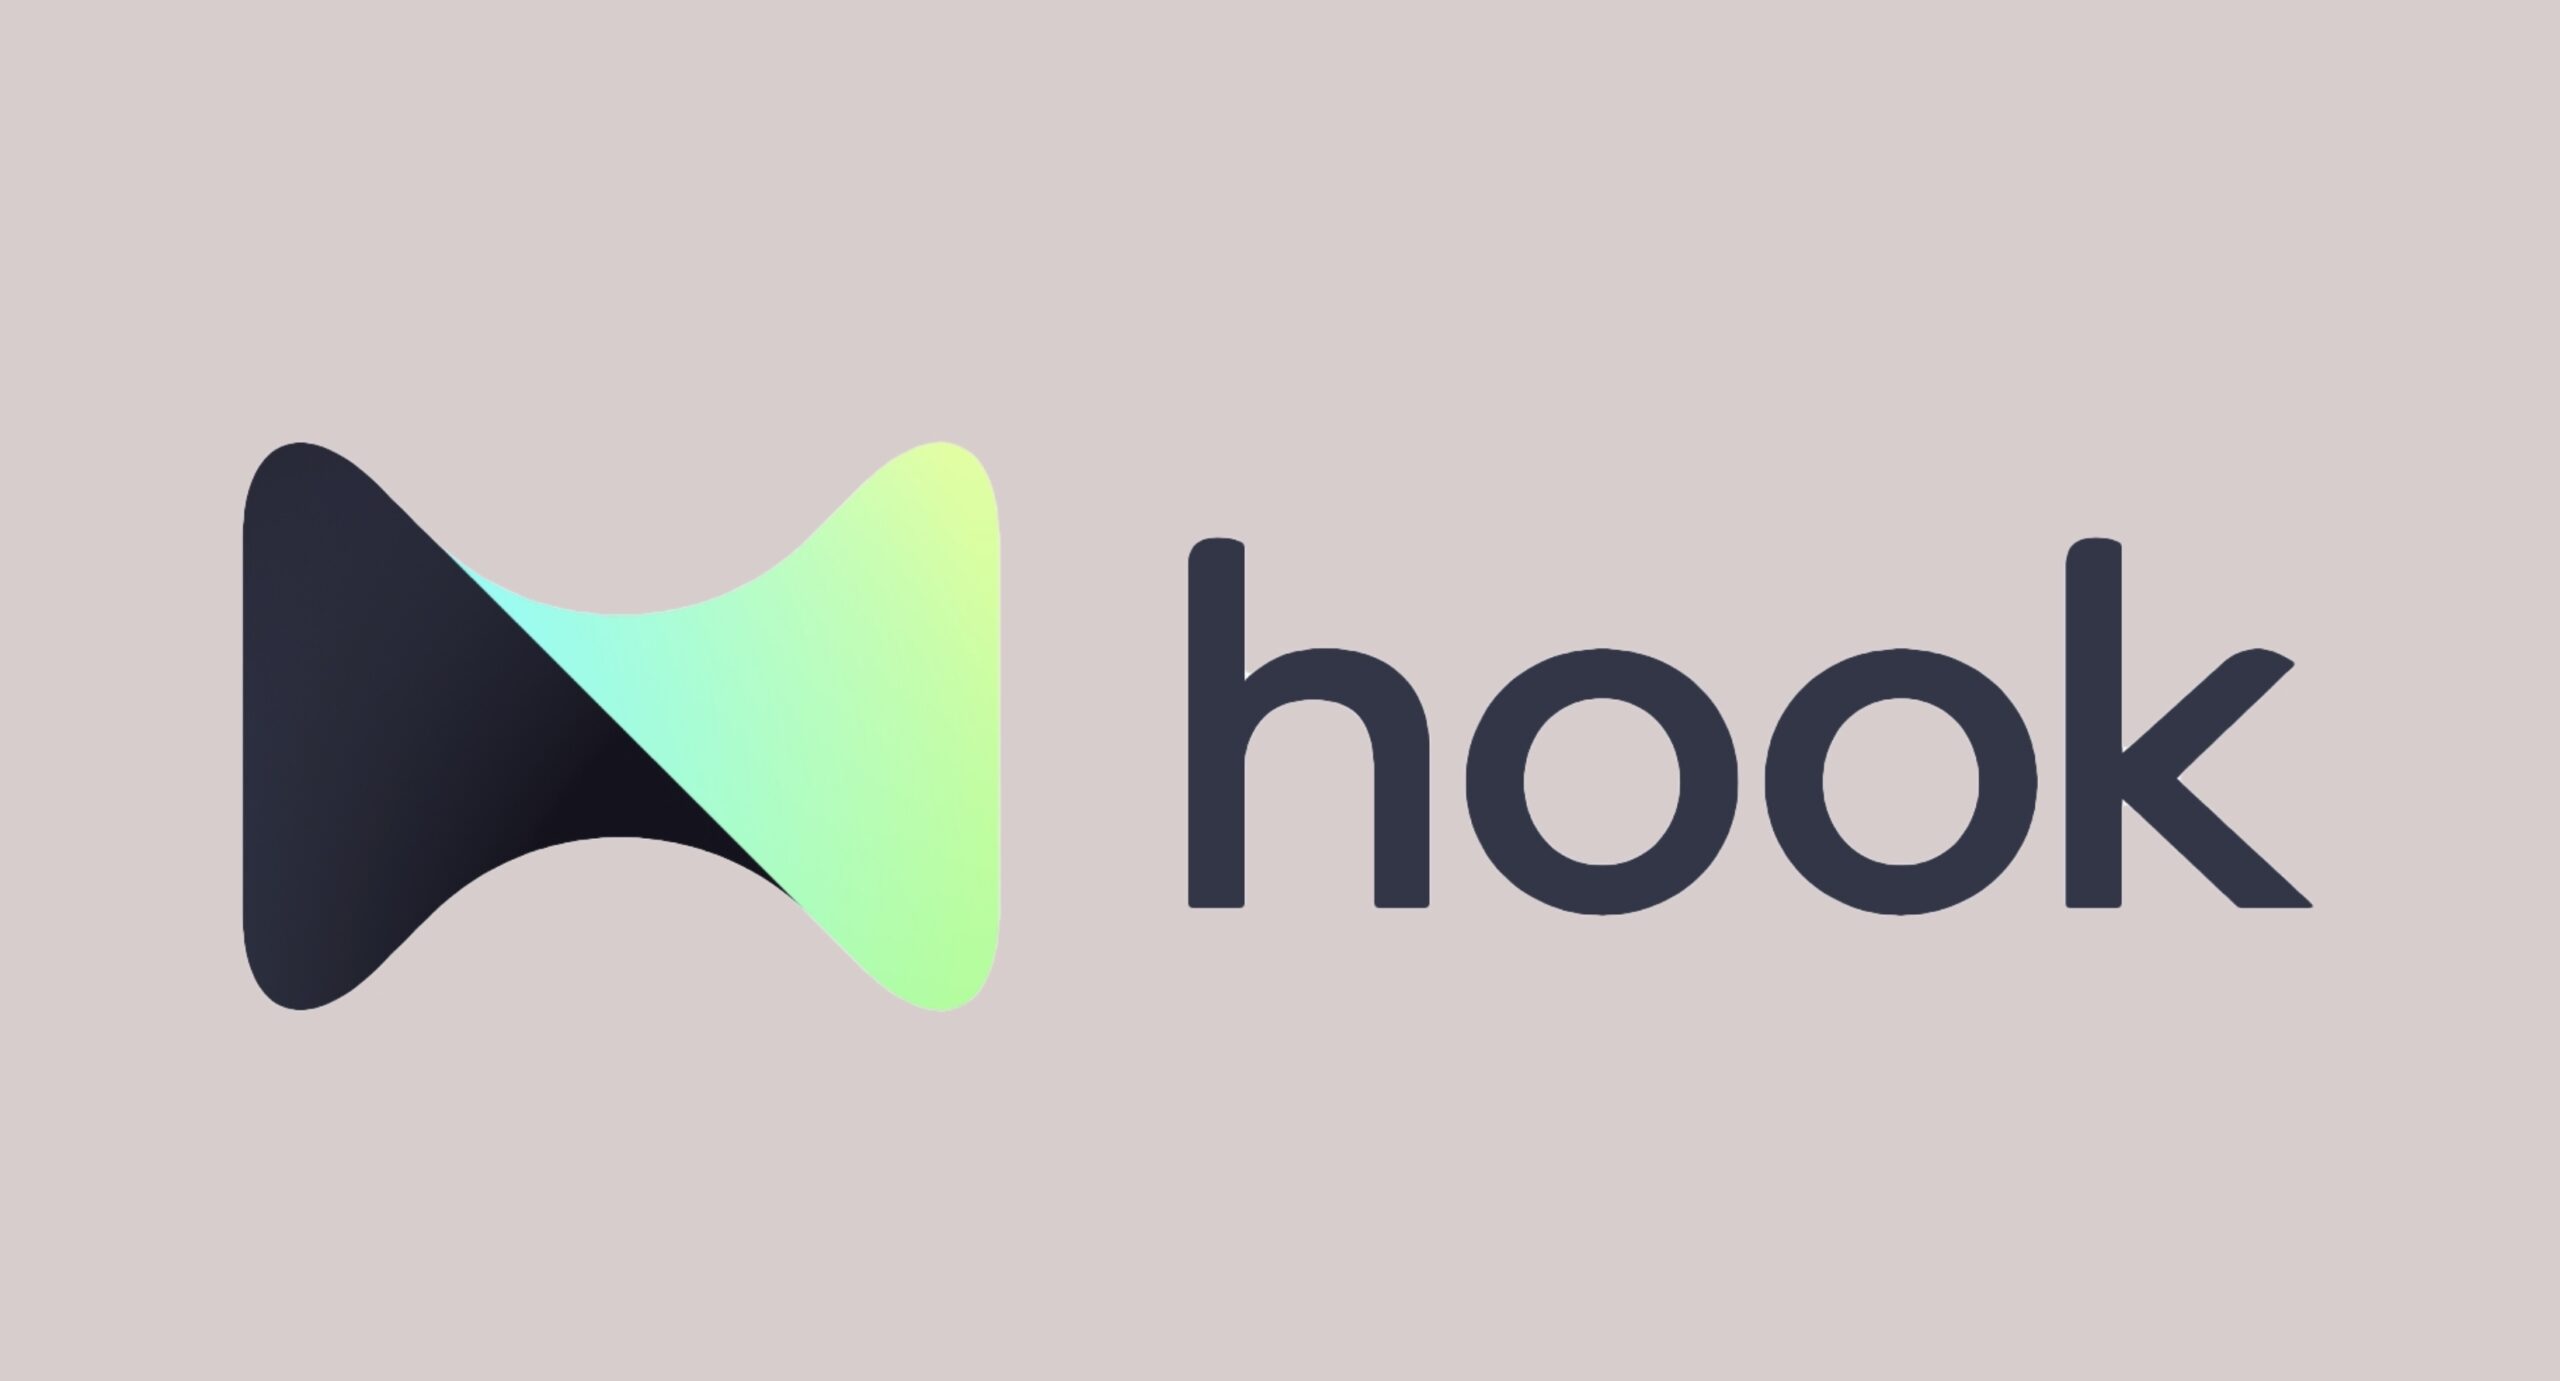 AI Music Startup Hook Raises $3 Million to Fuel Remix Tools Bringing remixing within reach of all through intuitive AI interfaces.